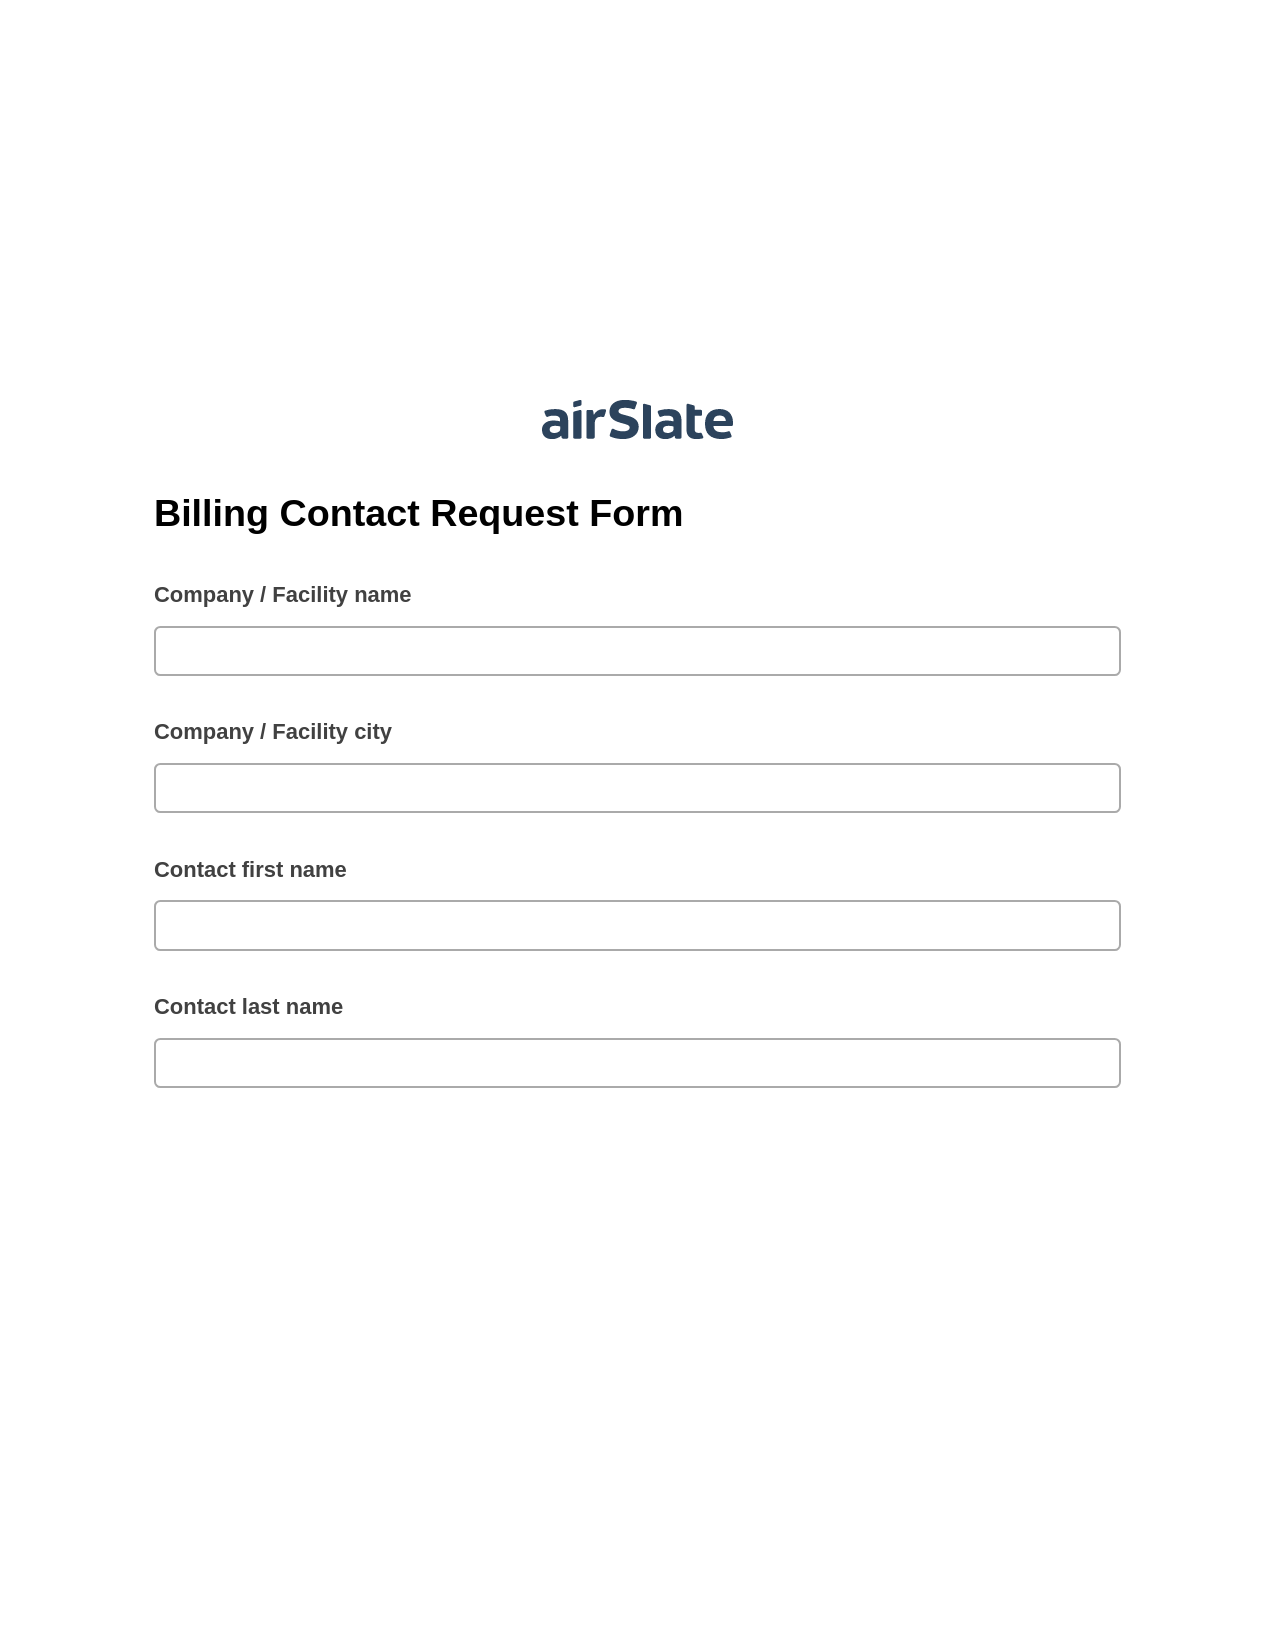 Multirole Billing Contact Request Form Pre-fill from NetSuite Records Bot, Assign Roles to Recipients Bot, Text Message Notification Postfinish Bot